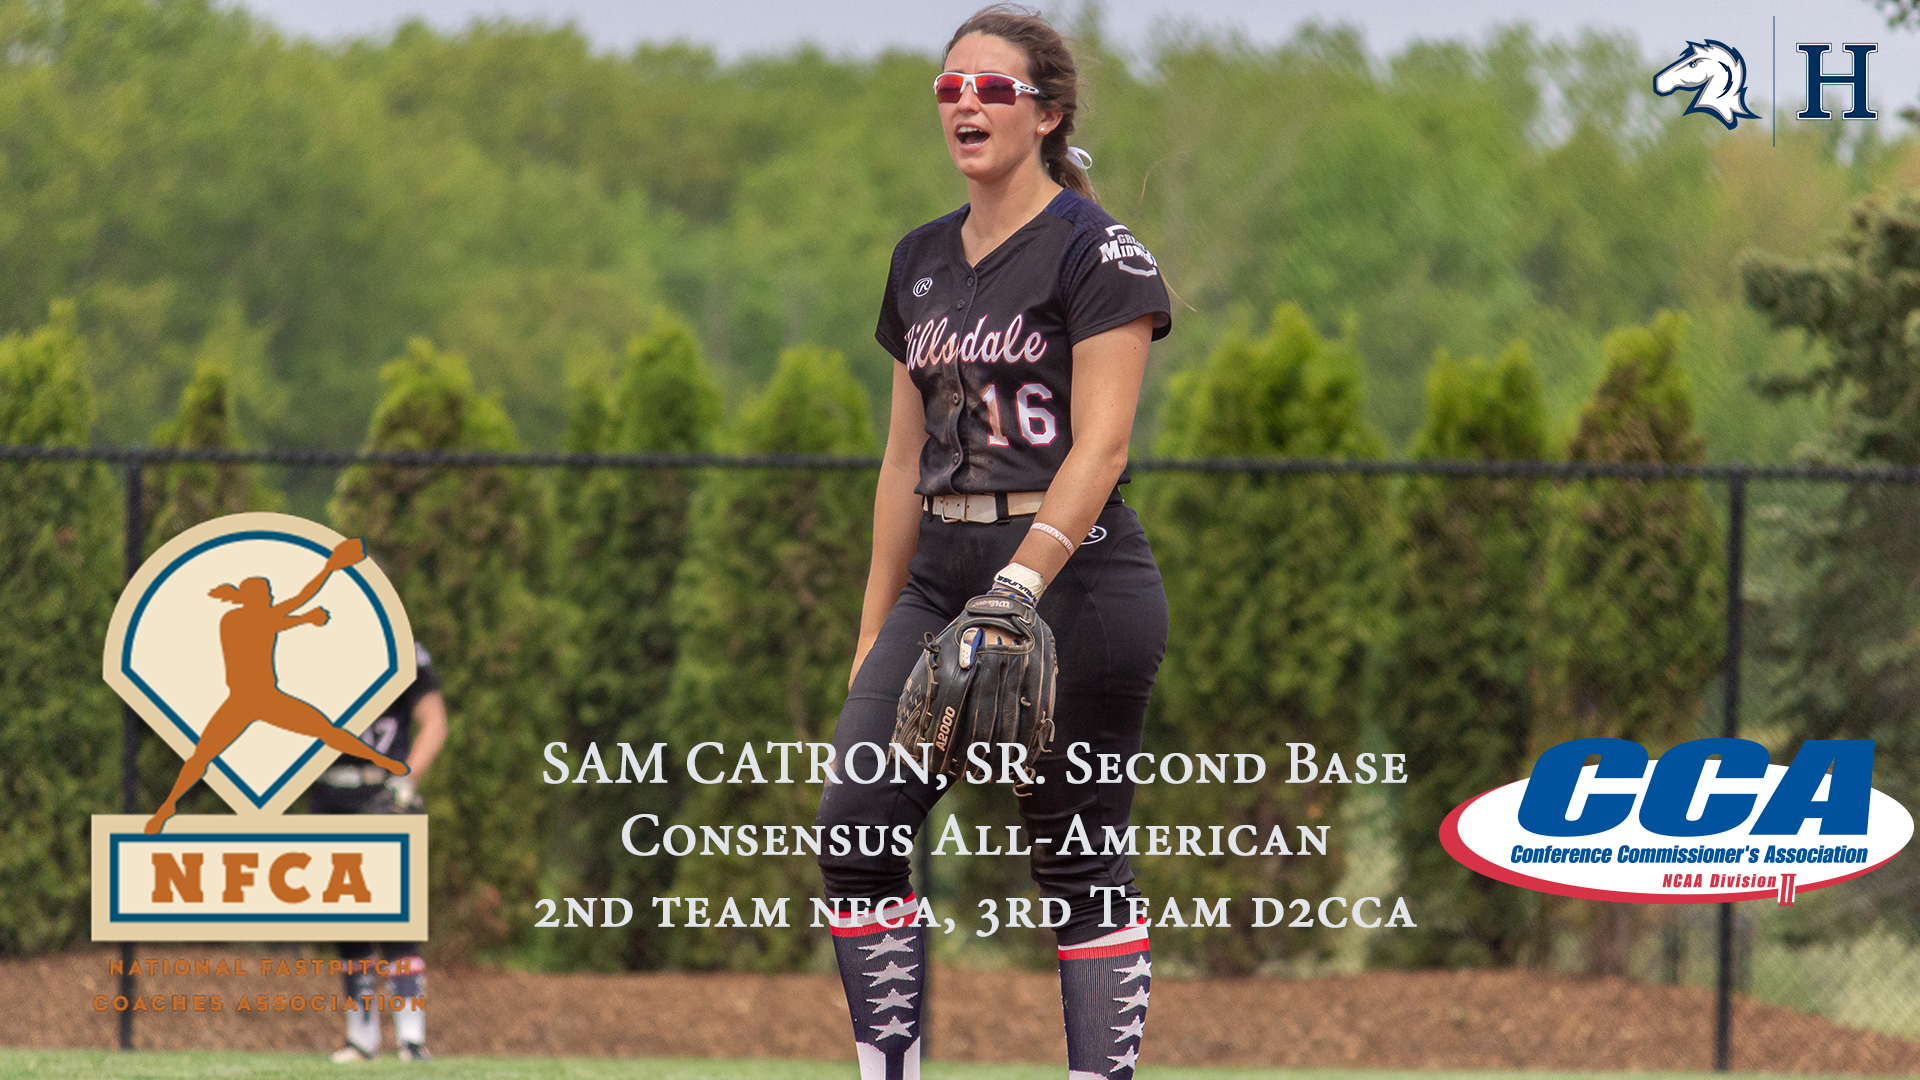 Chargers' Catron becomes first consensus All-American in program history with NFCA, D2CCA honors